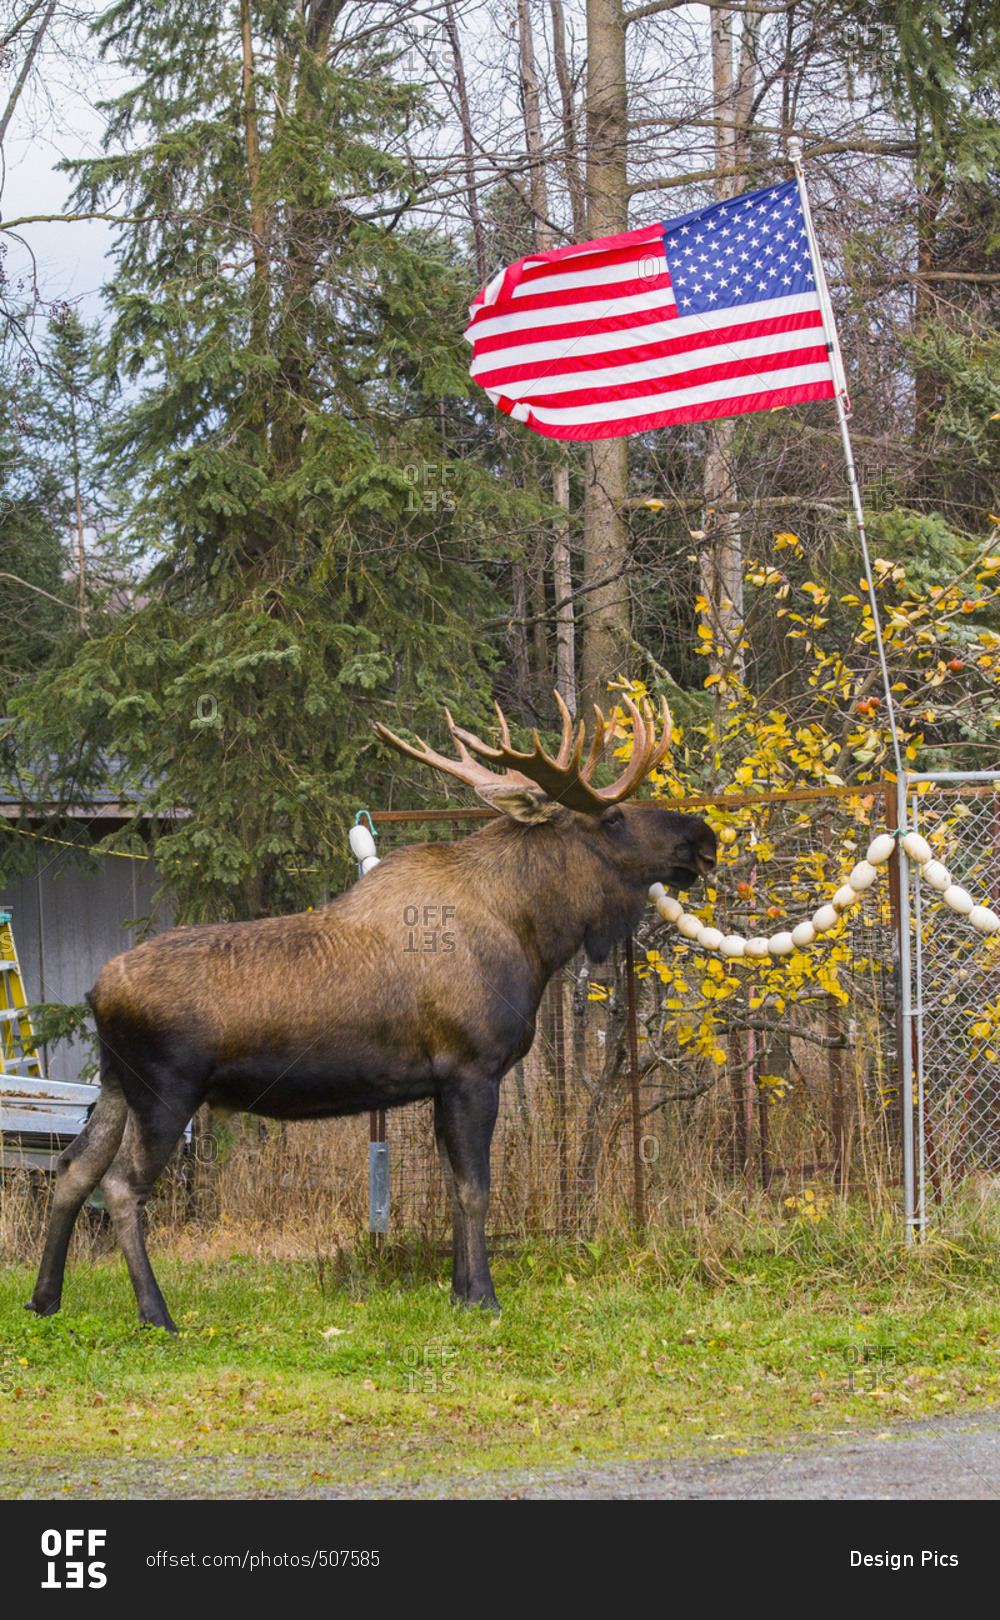 A large bull moose (alces alces) stands near an American flag near Jewel Lake Road in autumn; Anchorage, Alaska, United States of America